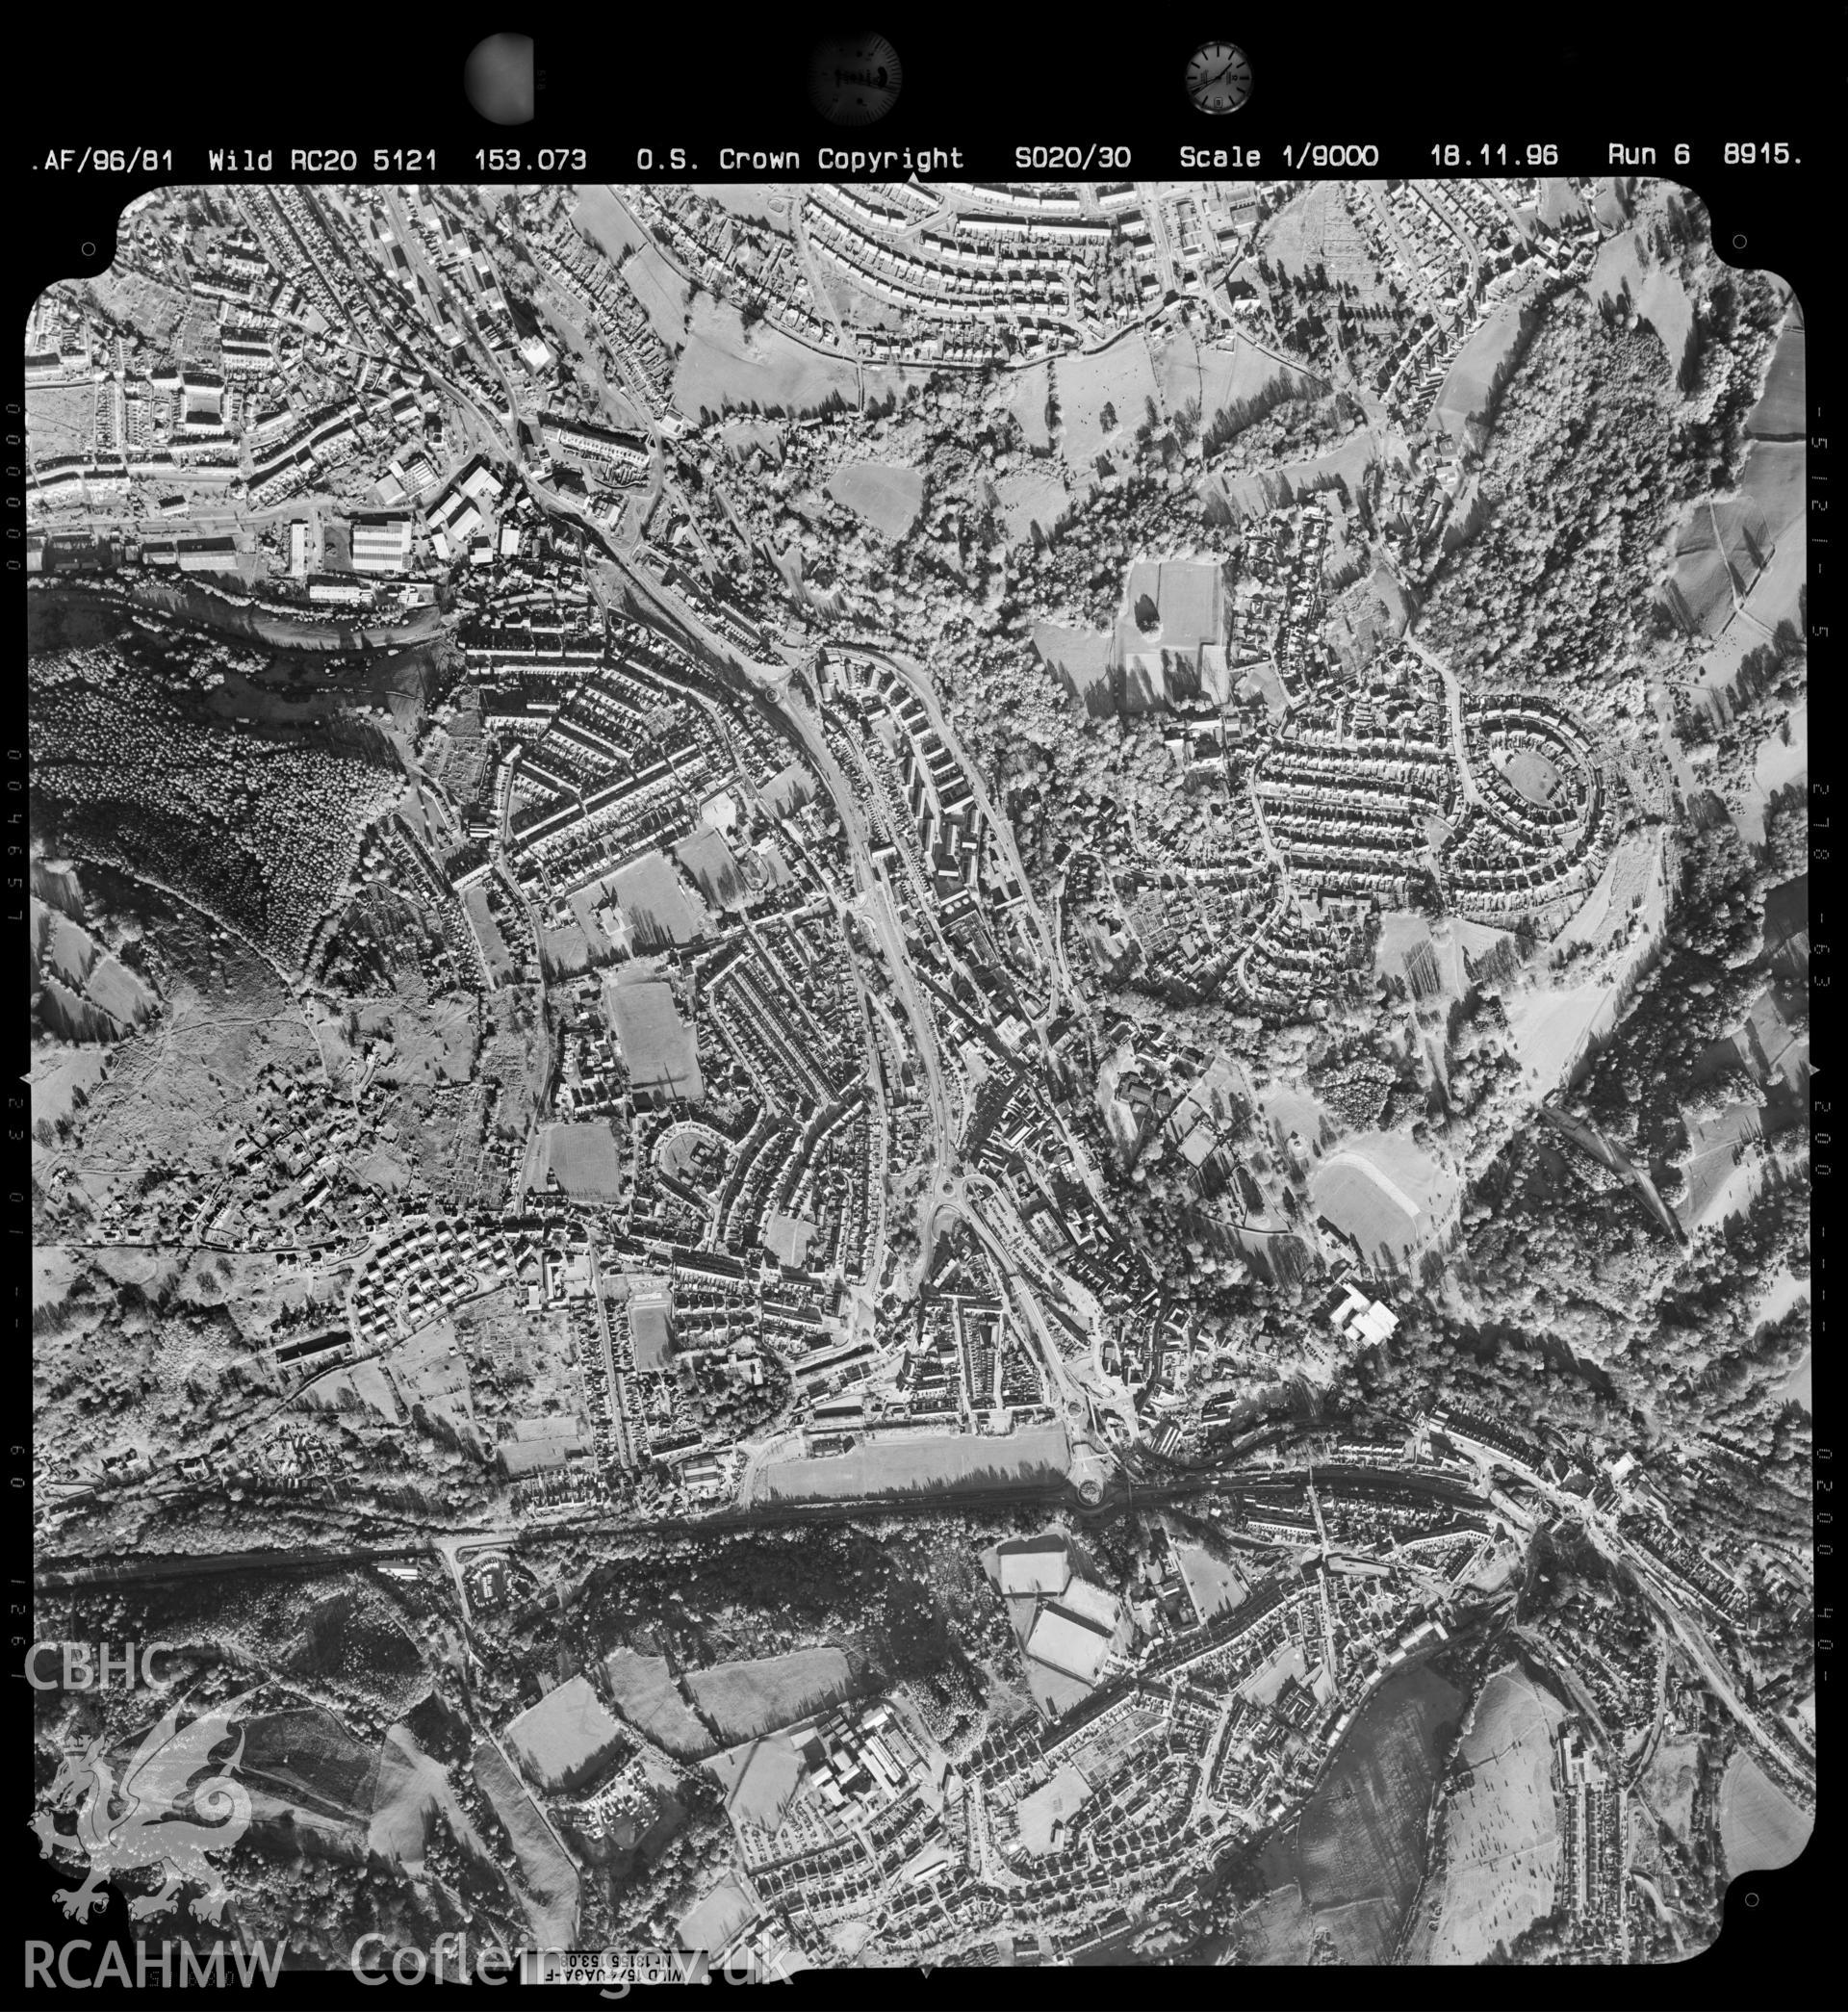 Digitized copy of an aerial photograph showing the Pontypool area, taken by Ordnance Survey, 1996.